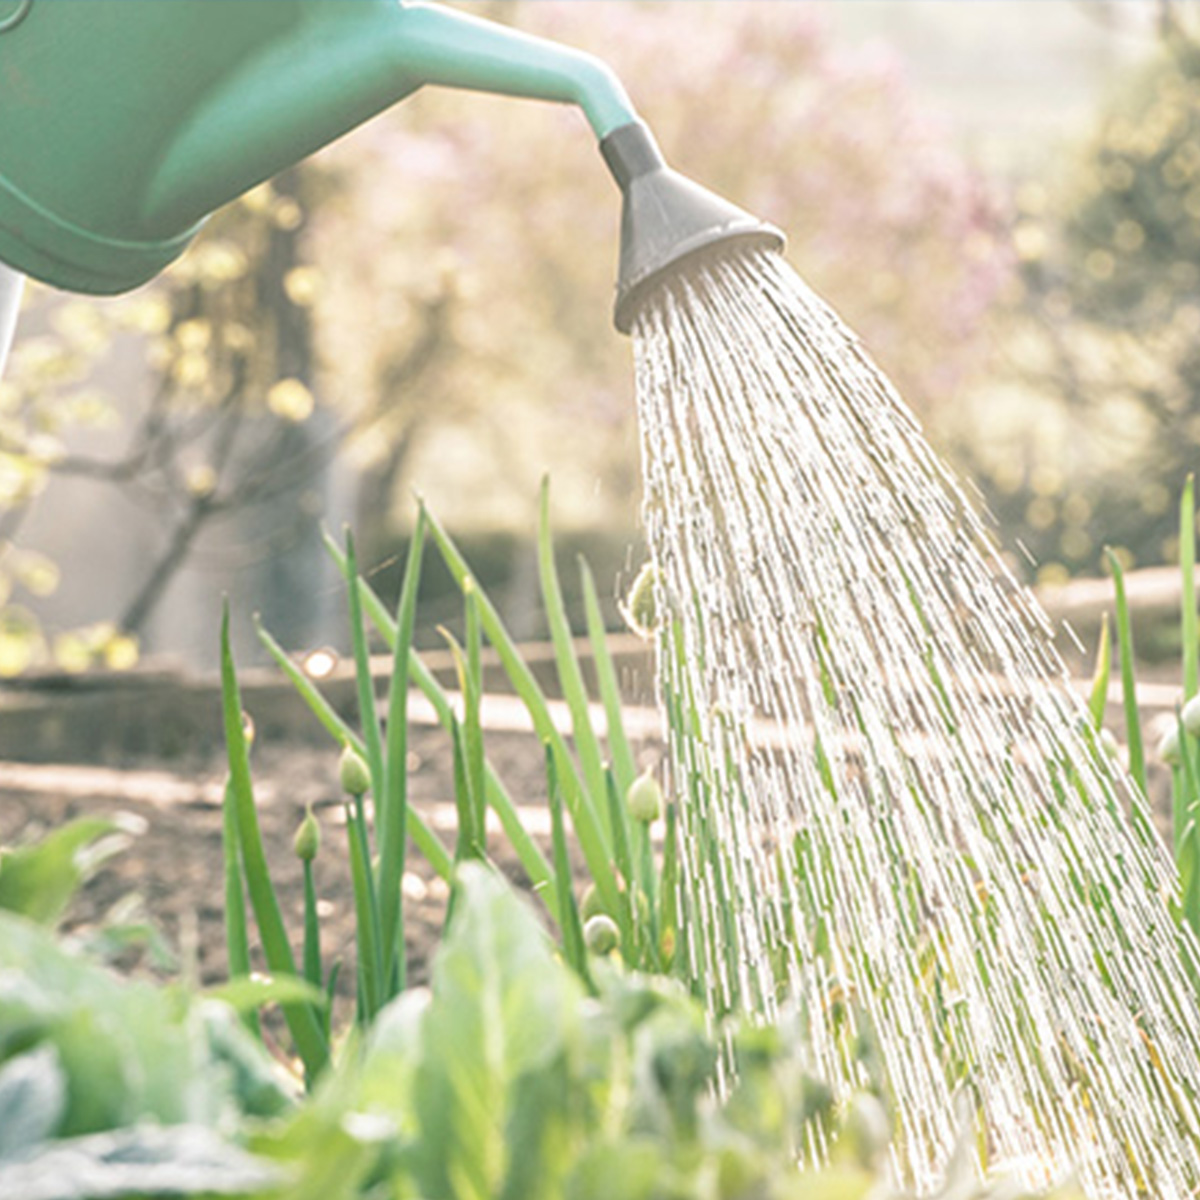 Top tips to help save water in your garden